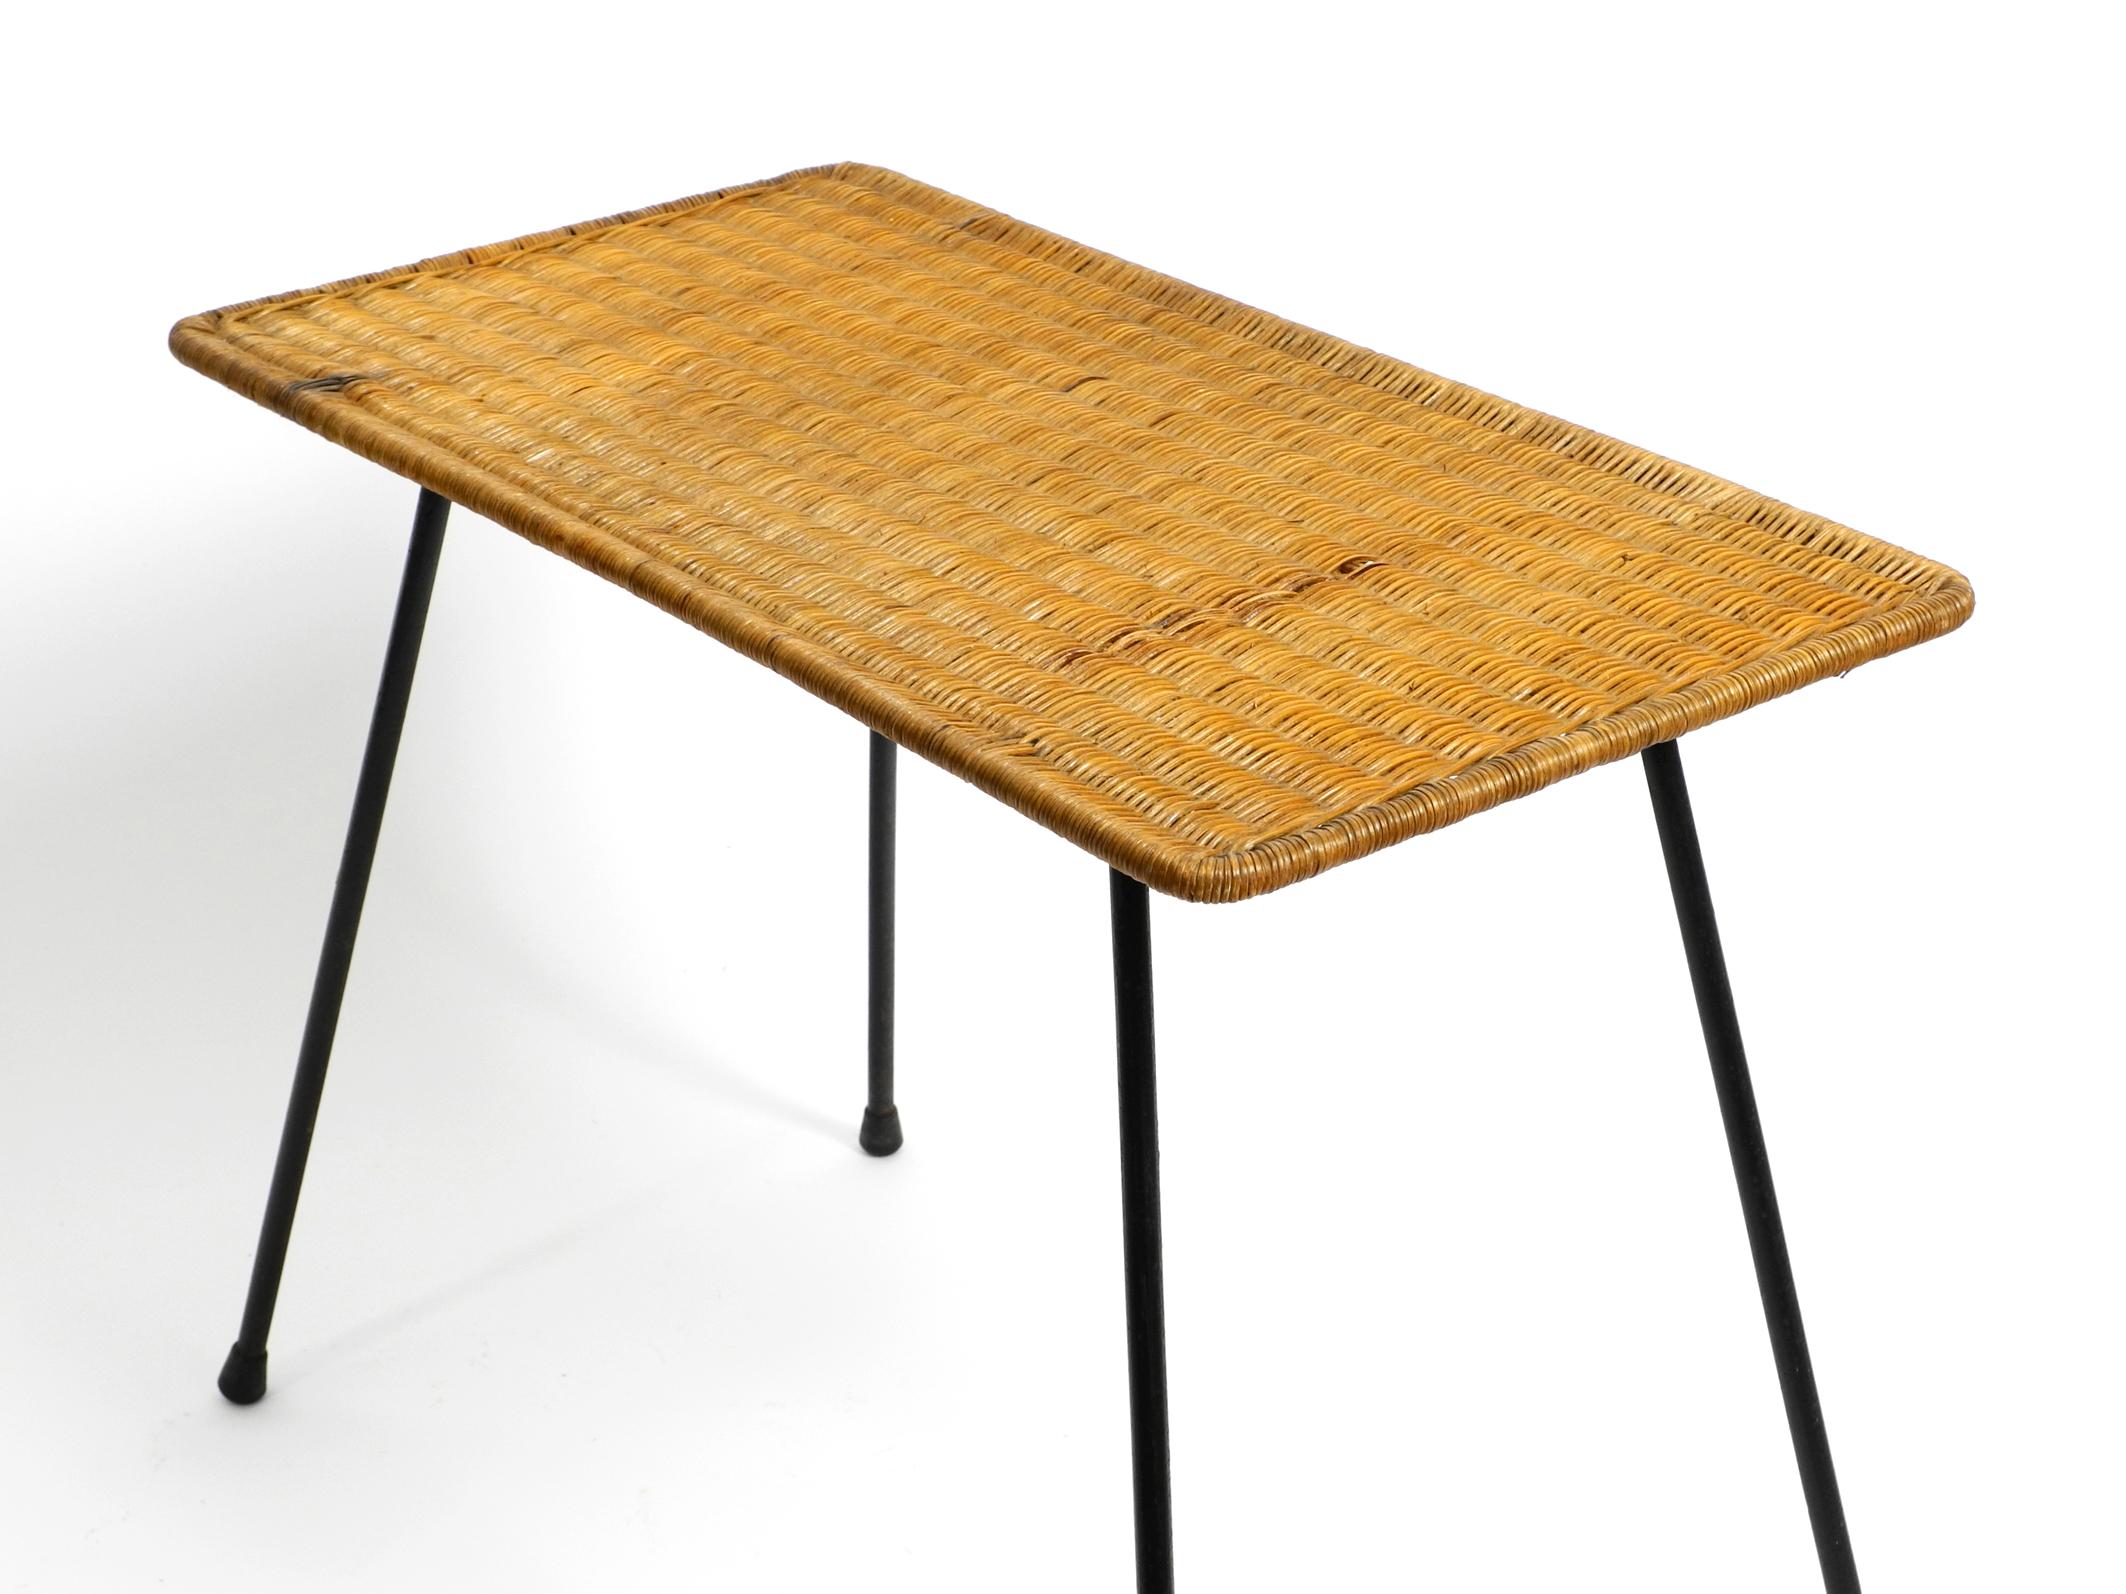 Italian Mid-Century Modern Rattan Side or Coffee Table with a Heavy Iron Frame For Sale 2